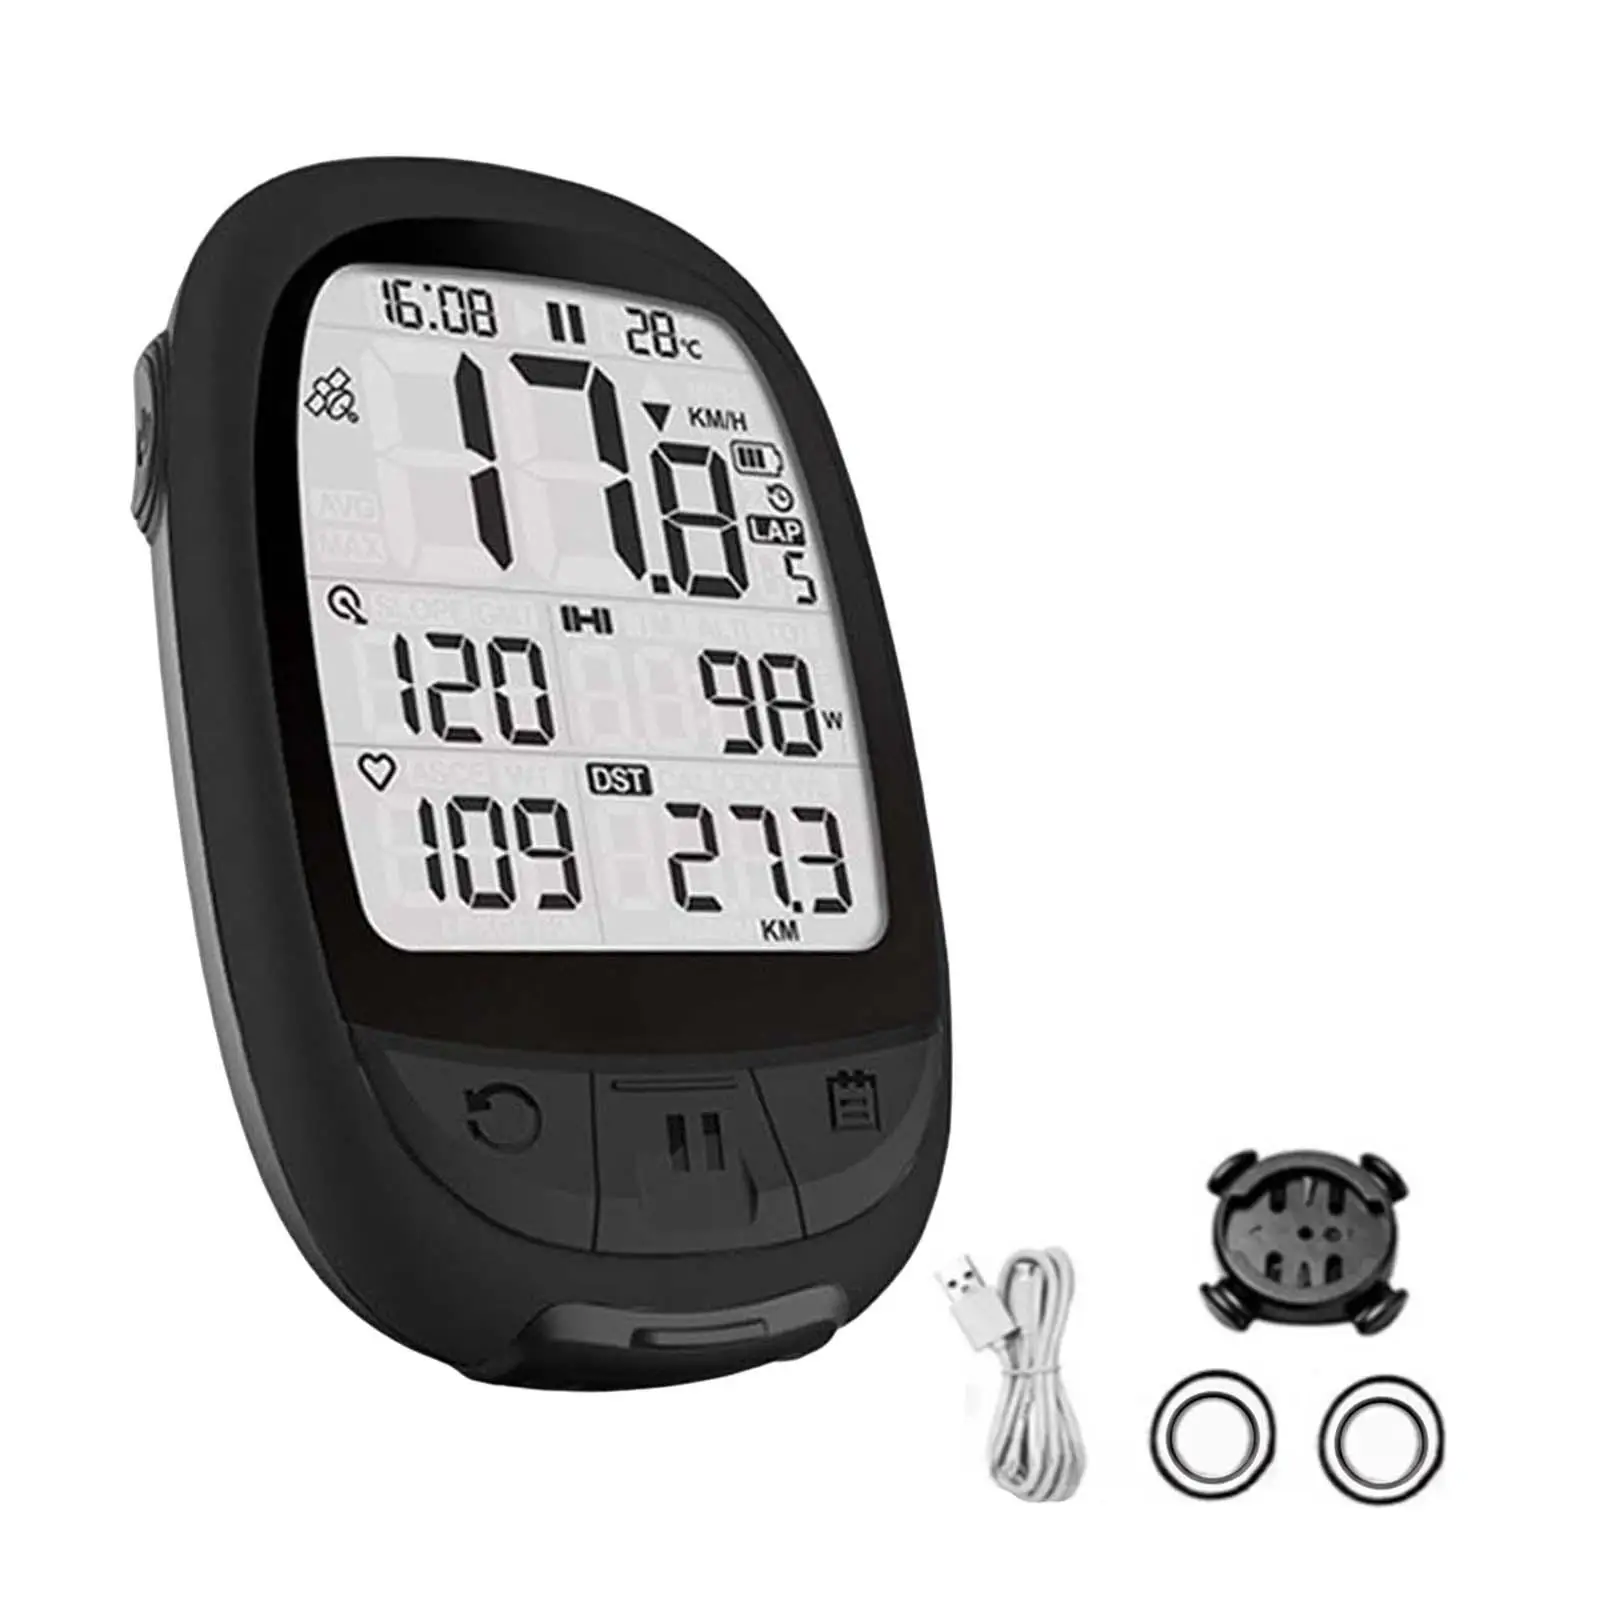 Bicycle Computer GPS Navigation ANT BT 4.0 USB Rechargeable Heart Rate Monitor Stopwatch Bike Odometer Speedometer Bike Computer